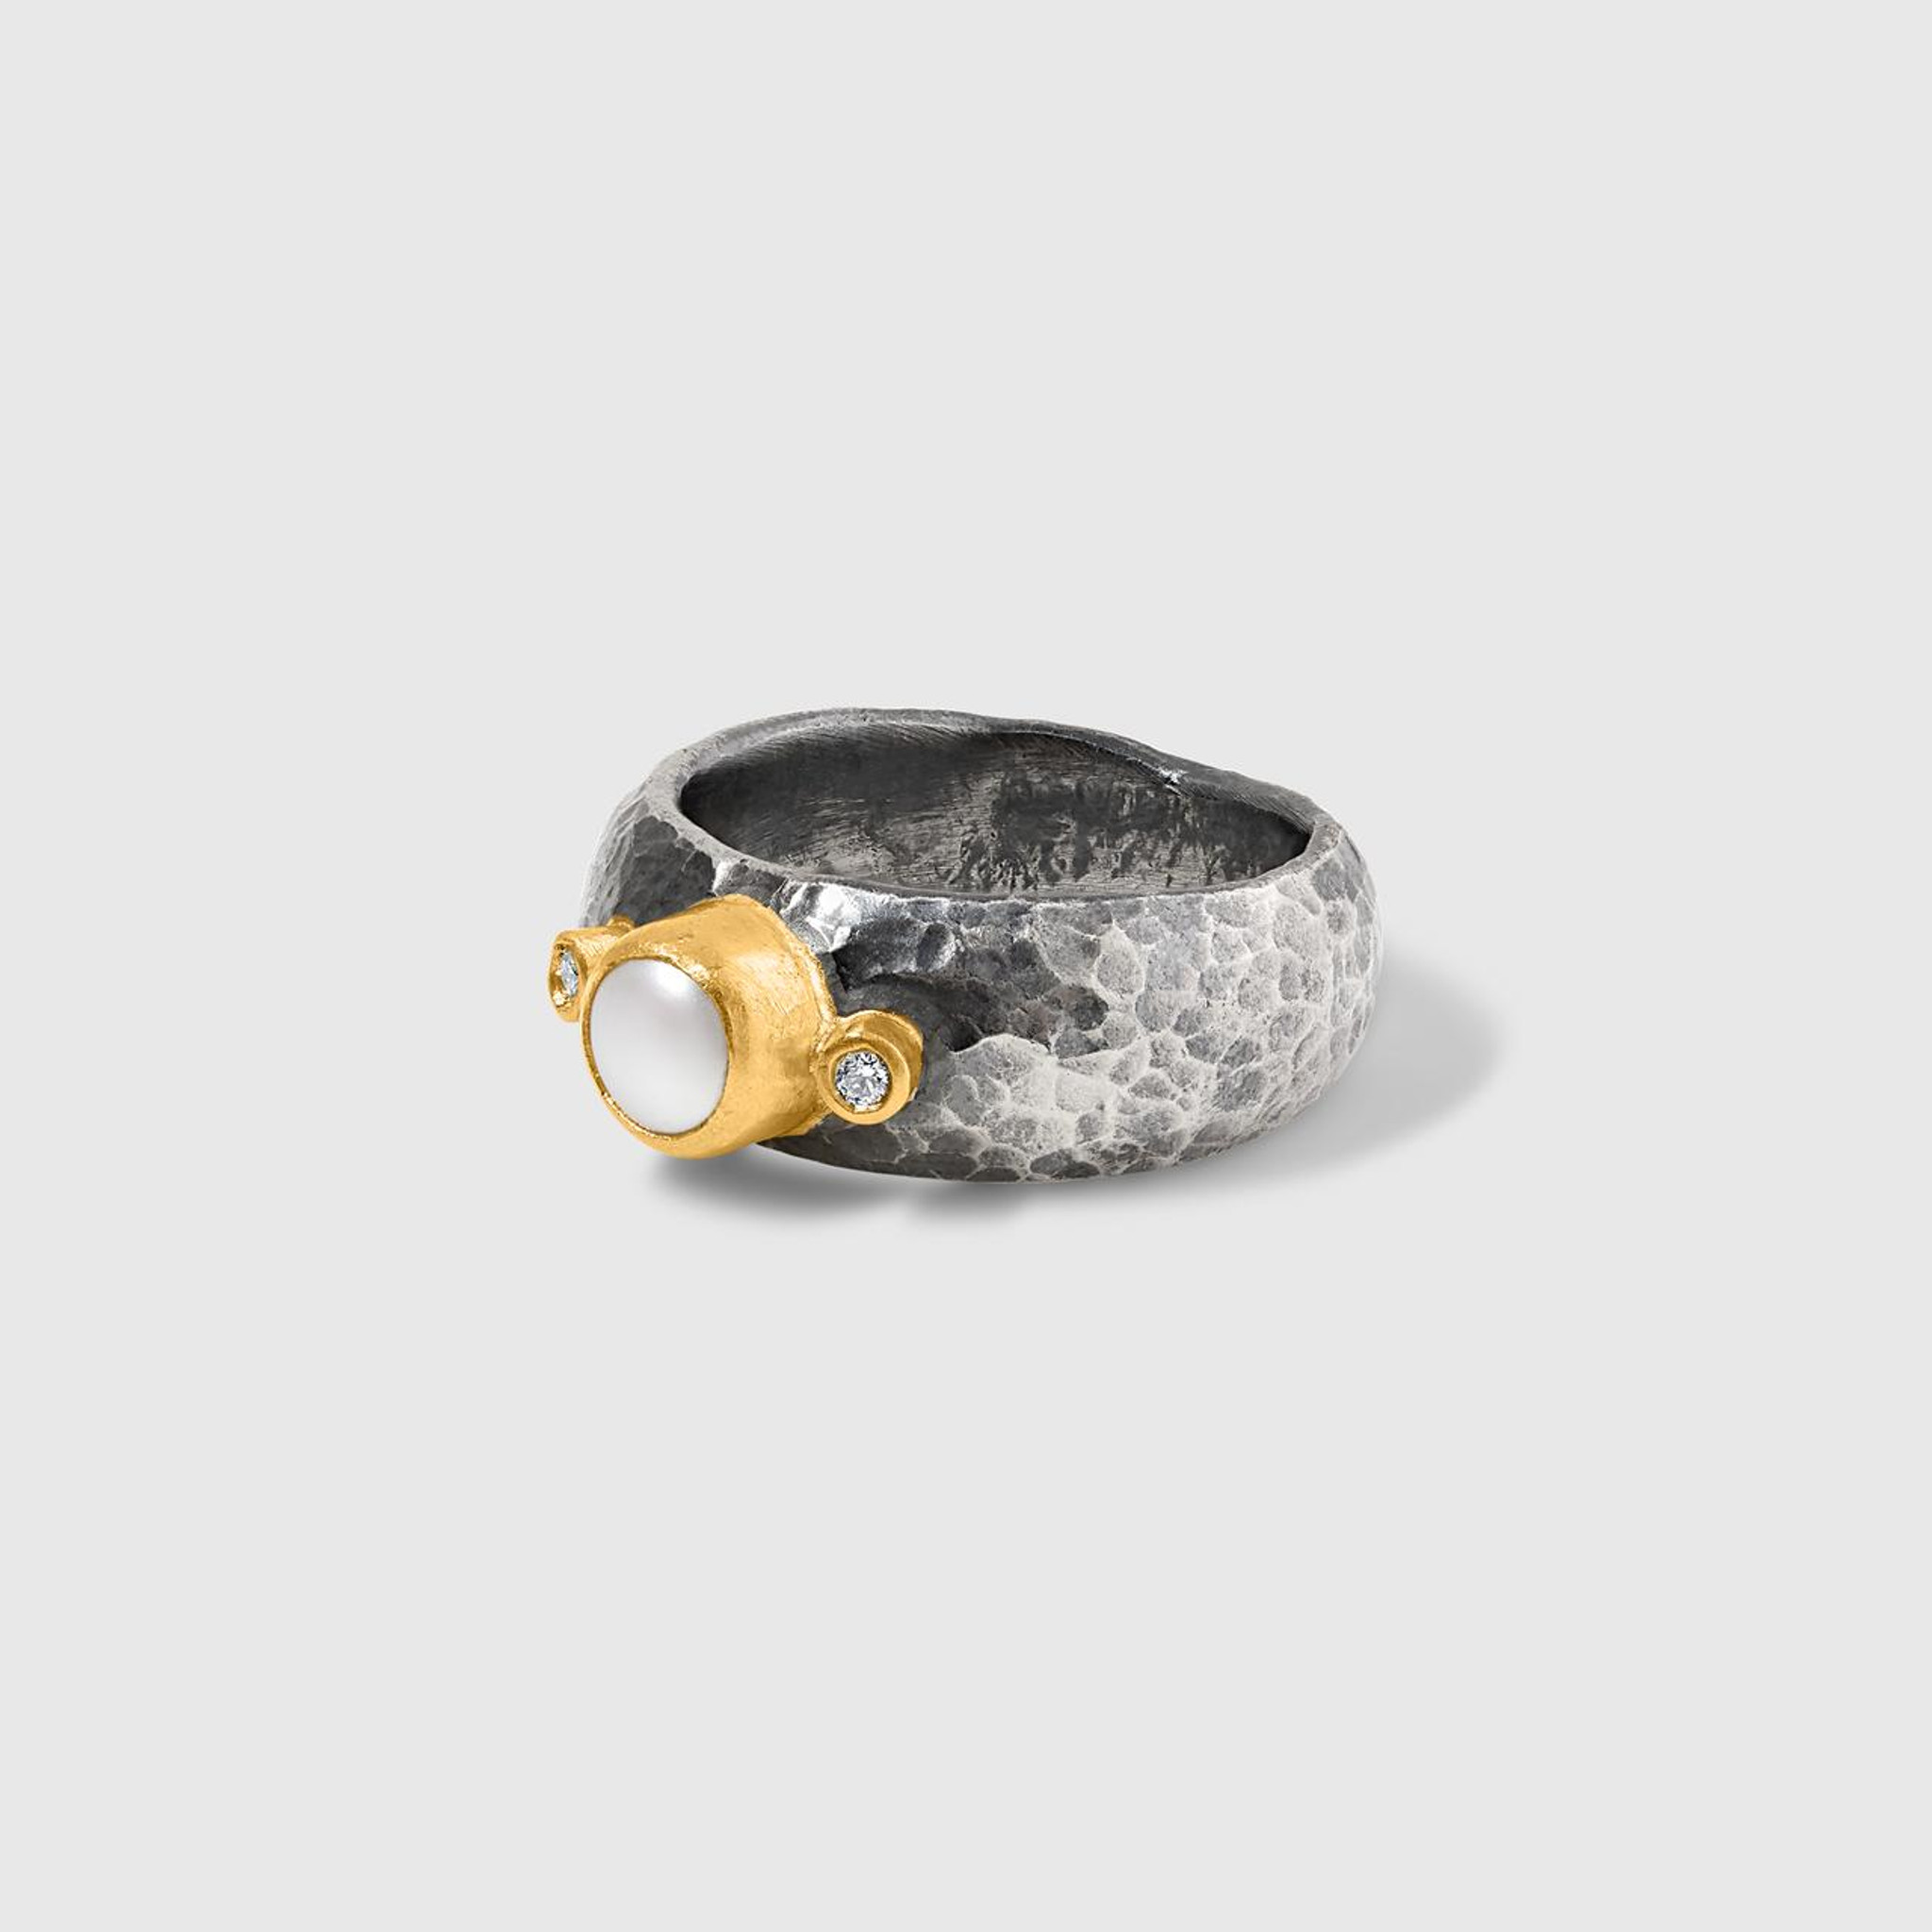 Prehistoric Works Hammered Silver Ring with Pearl and Diamonds, 24kt Gold and Sterling Silver 